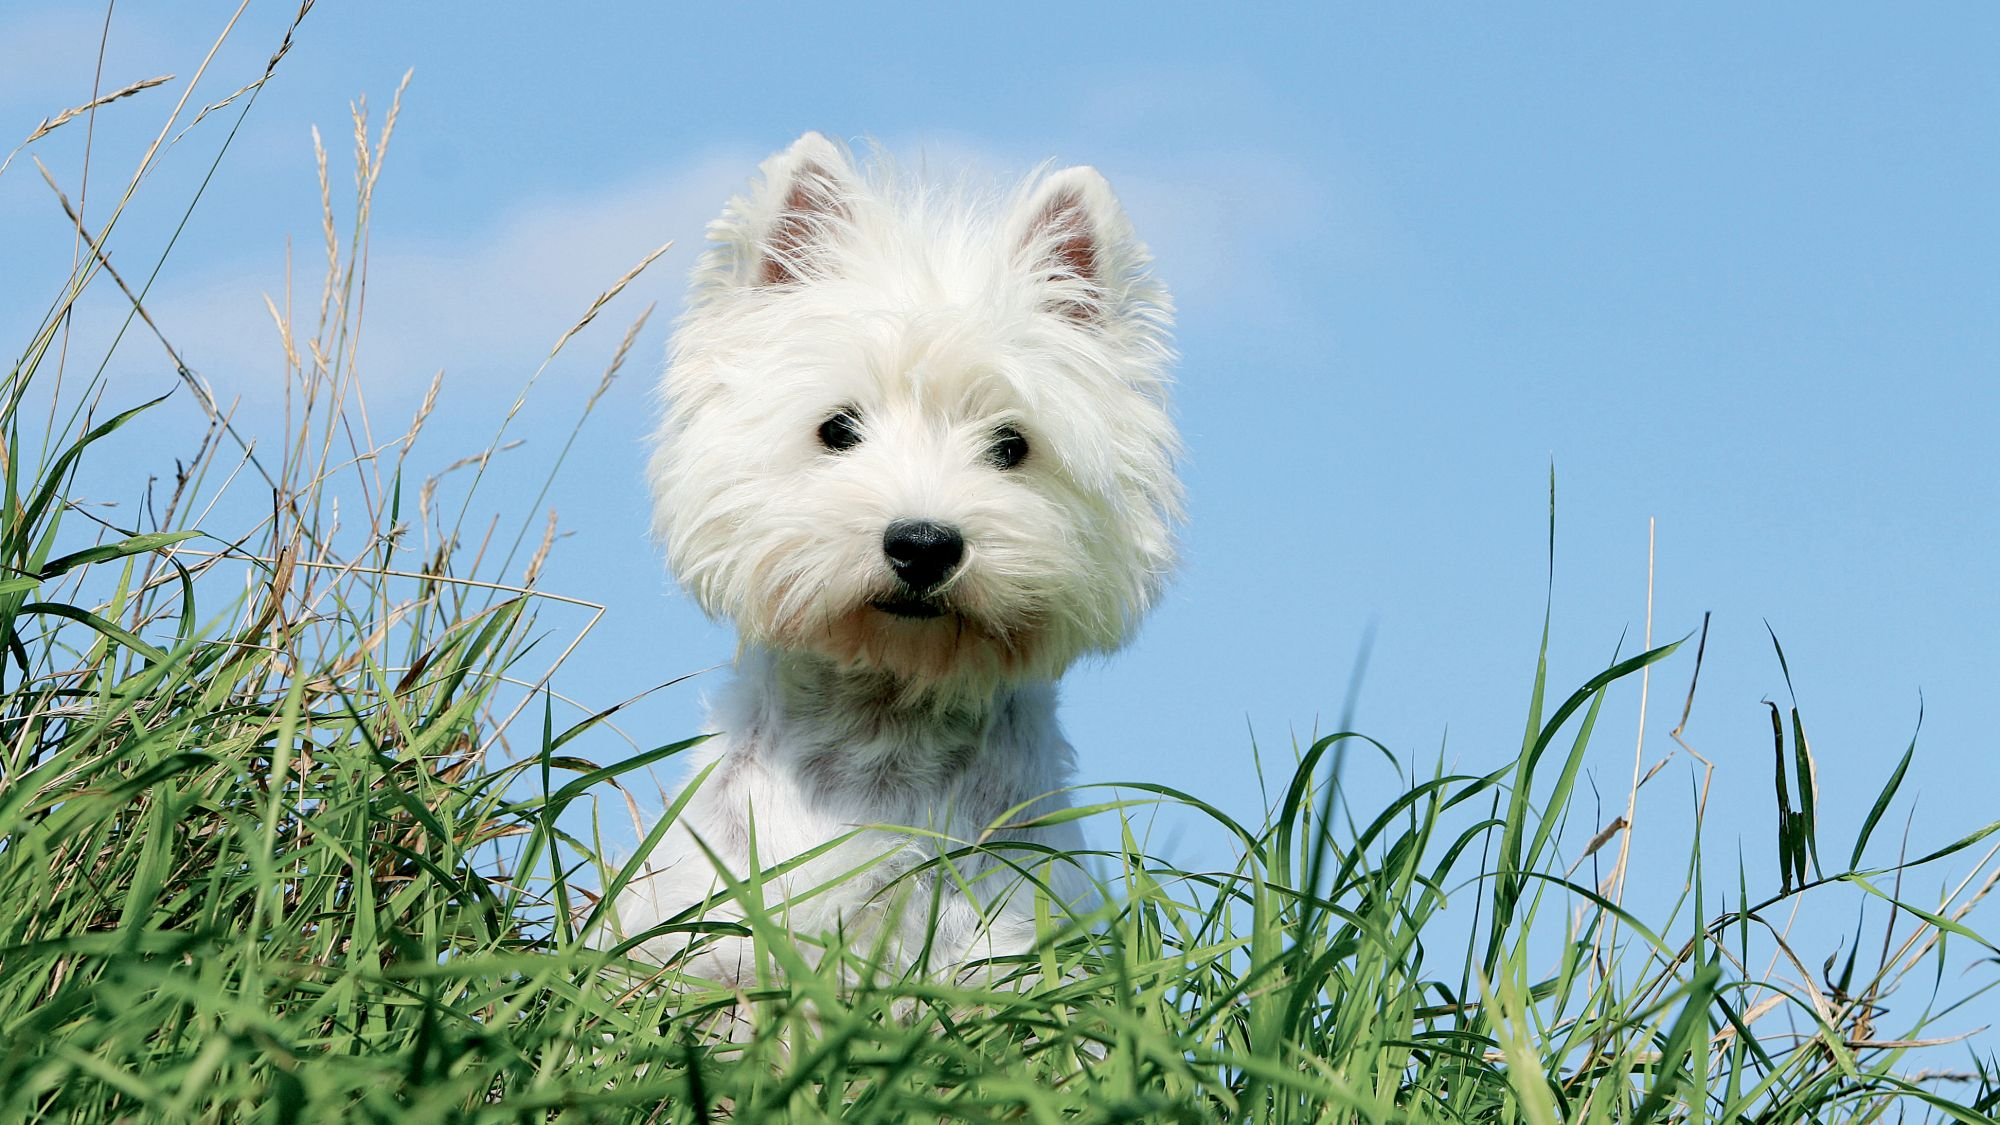 West Highland White Terrier peering out of long grass